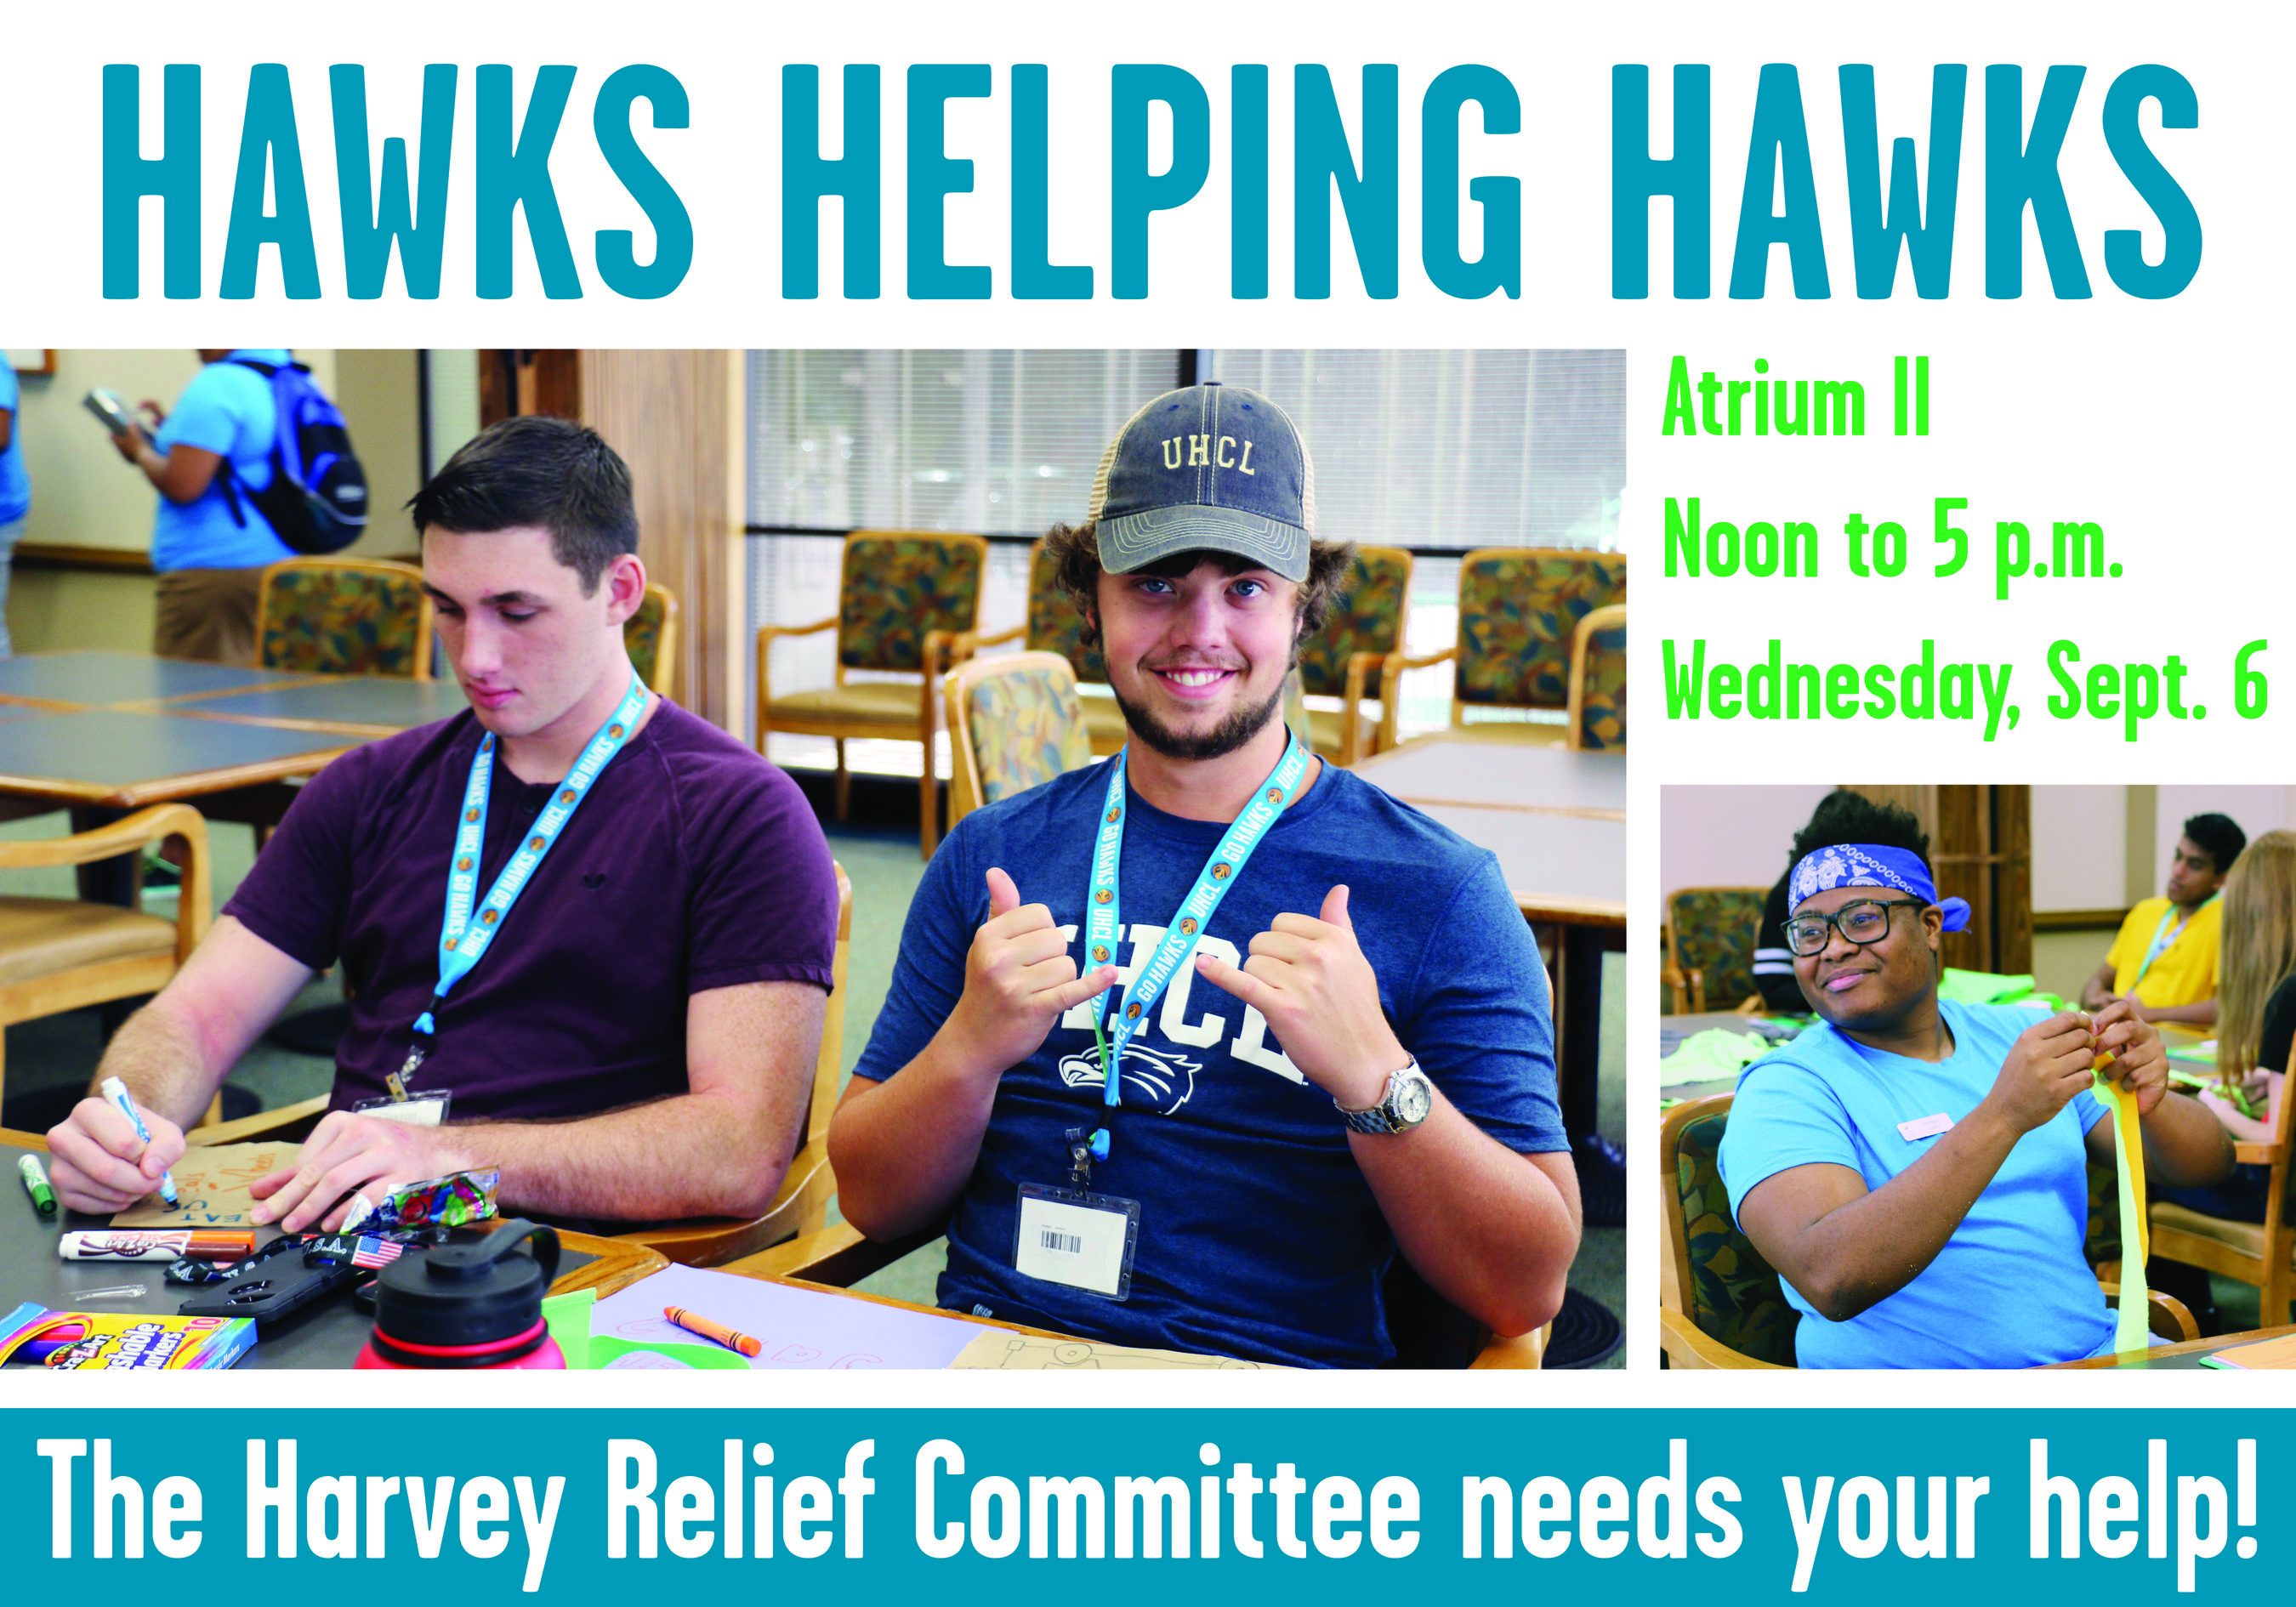 PHOTO: Promotional flyer for Hawks Helping Hawks. Photo courtesy of UHCL Student Life Office.